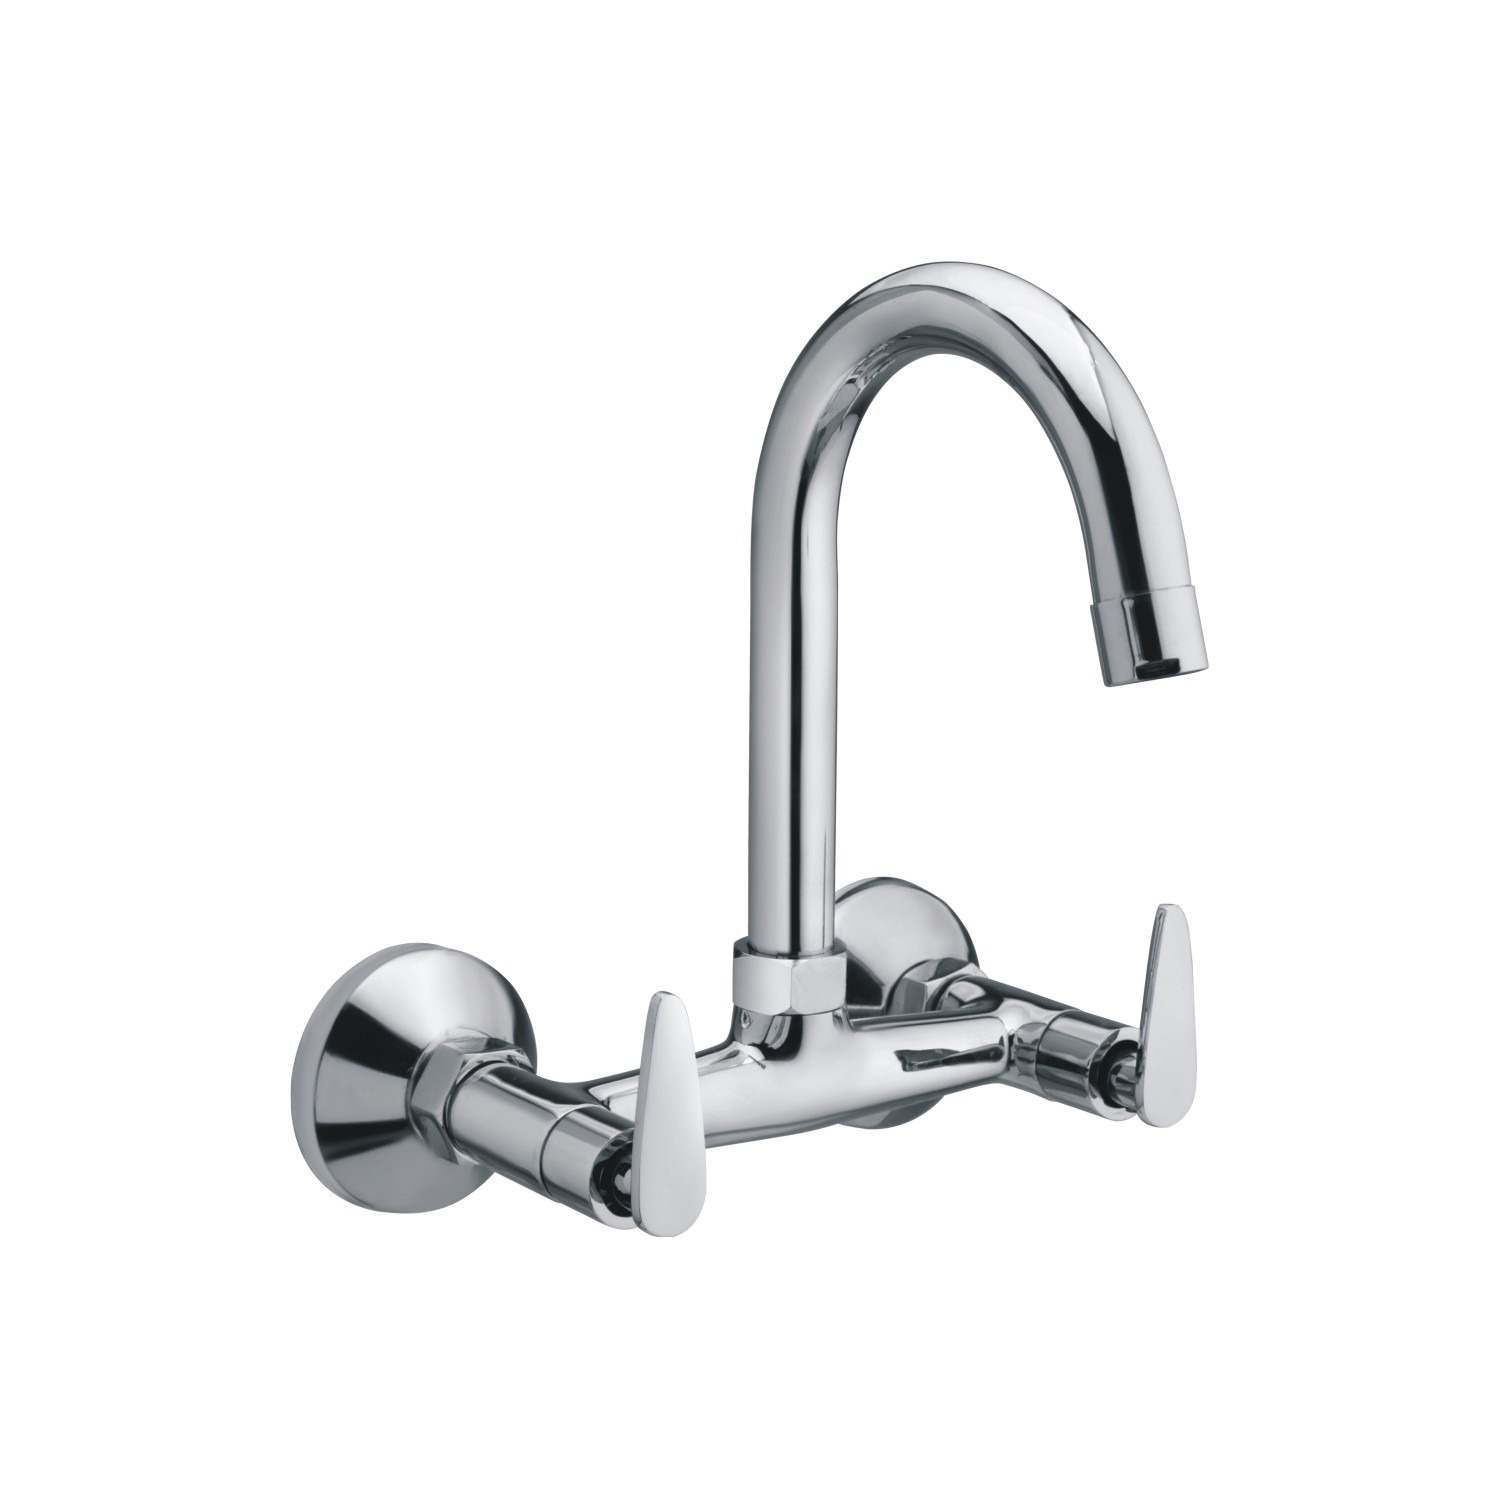 Krati Aink Mixer with Swivel Spout